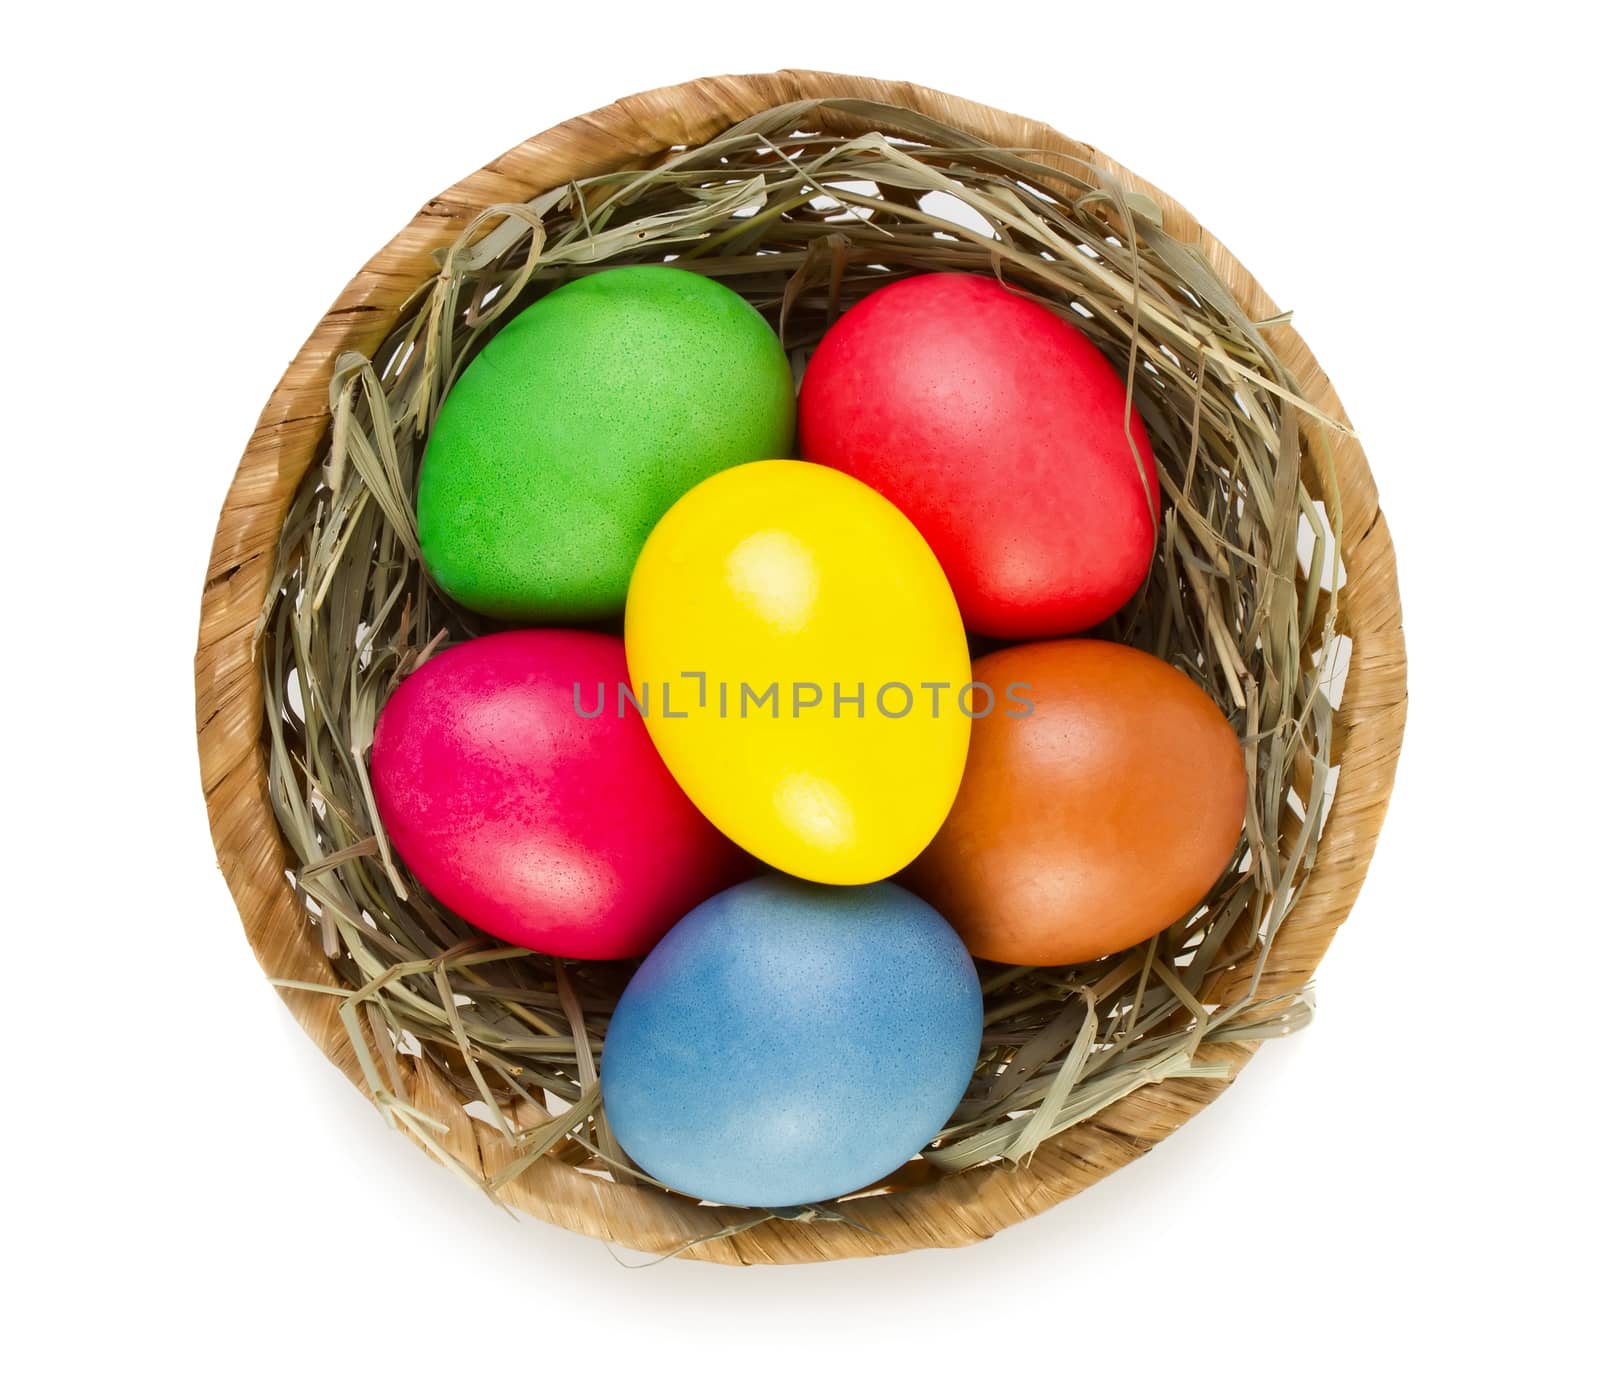 Easter eggs in nest isolated on white background